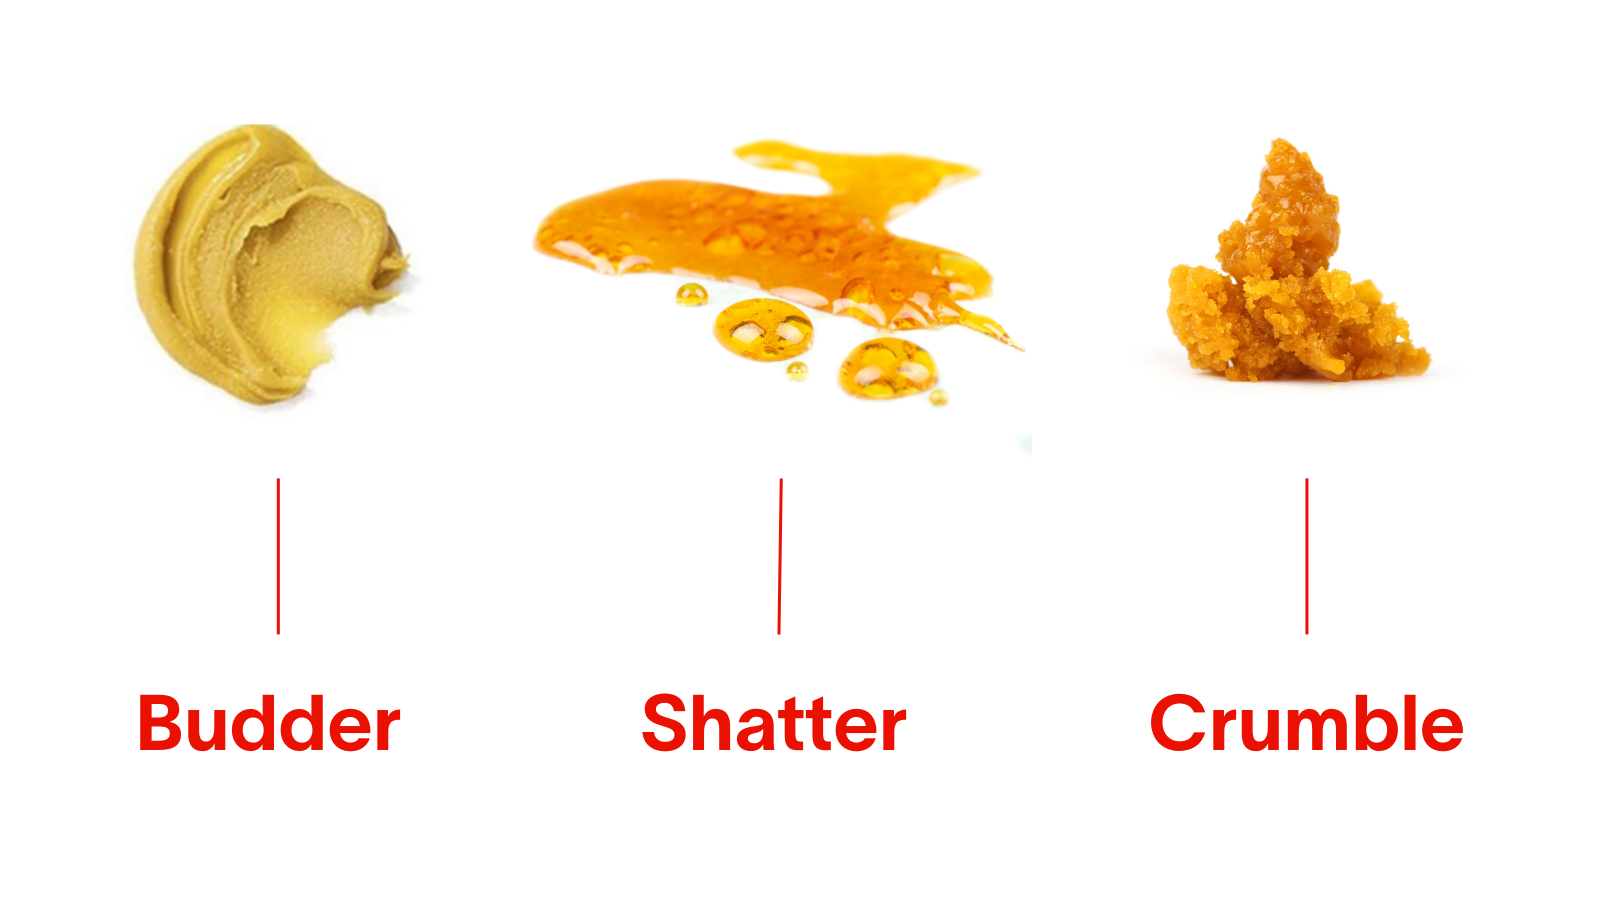 Is shatter better than crumble?